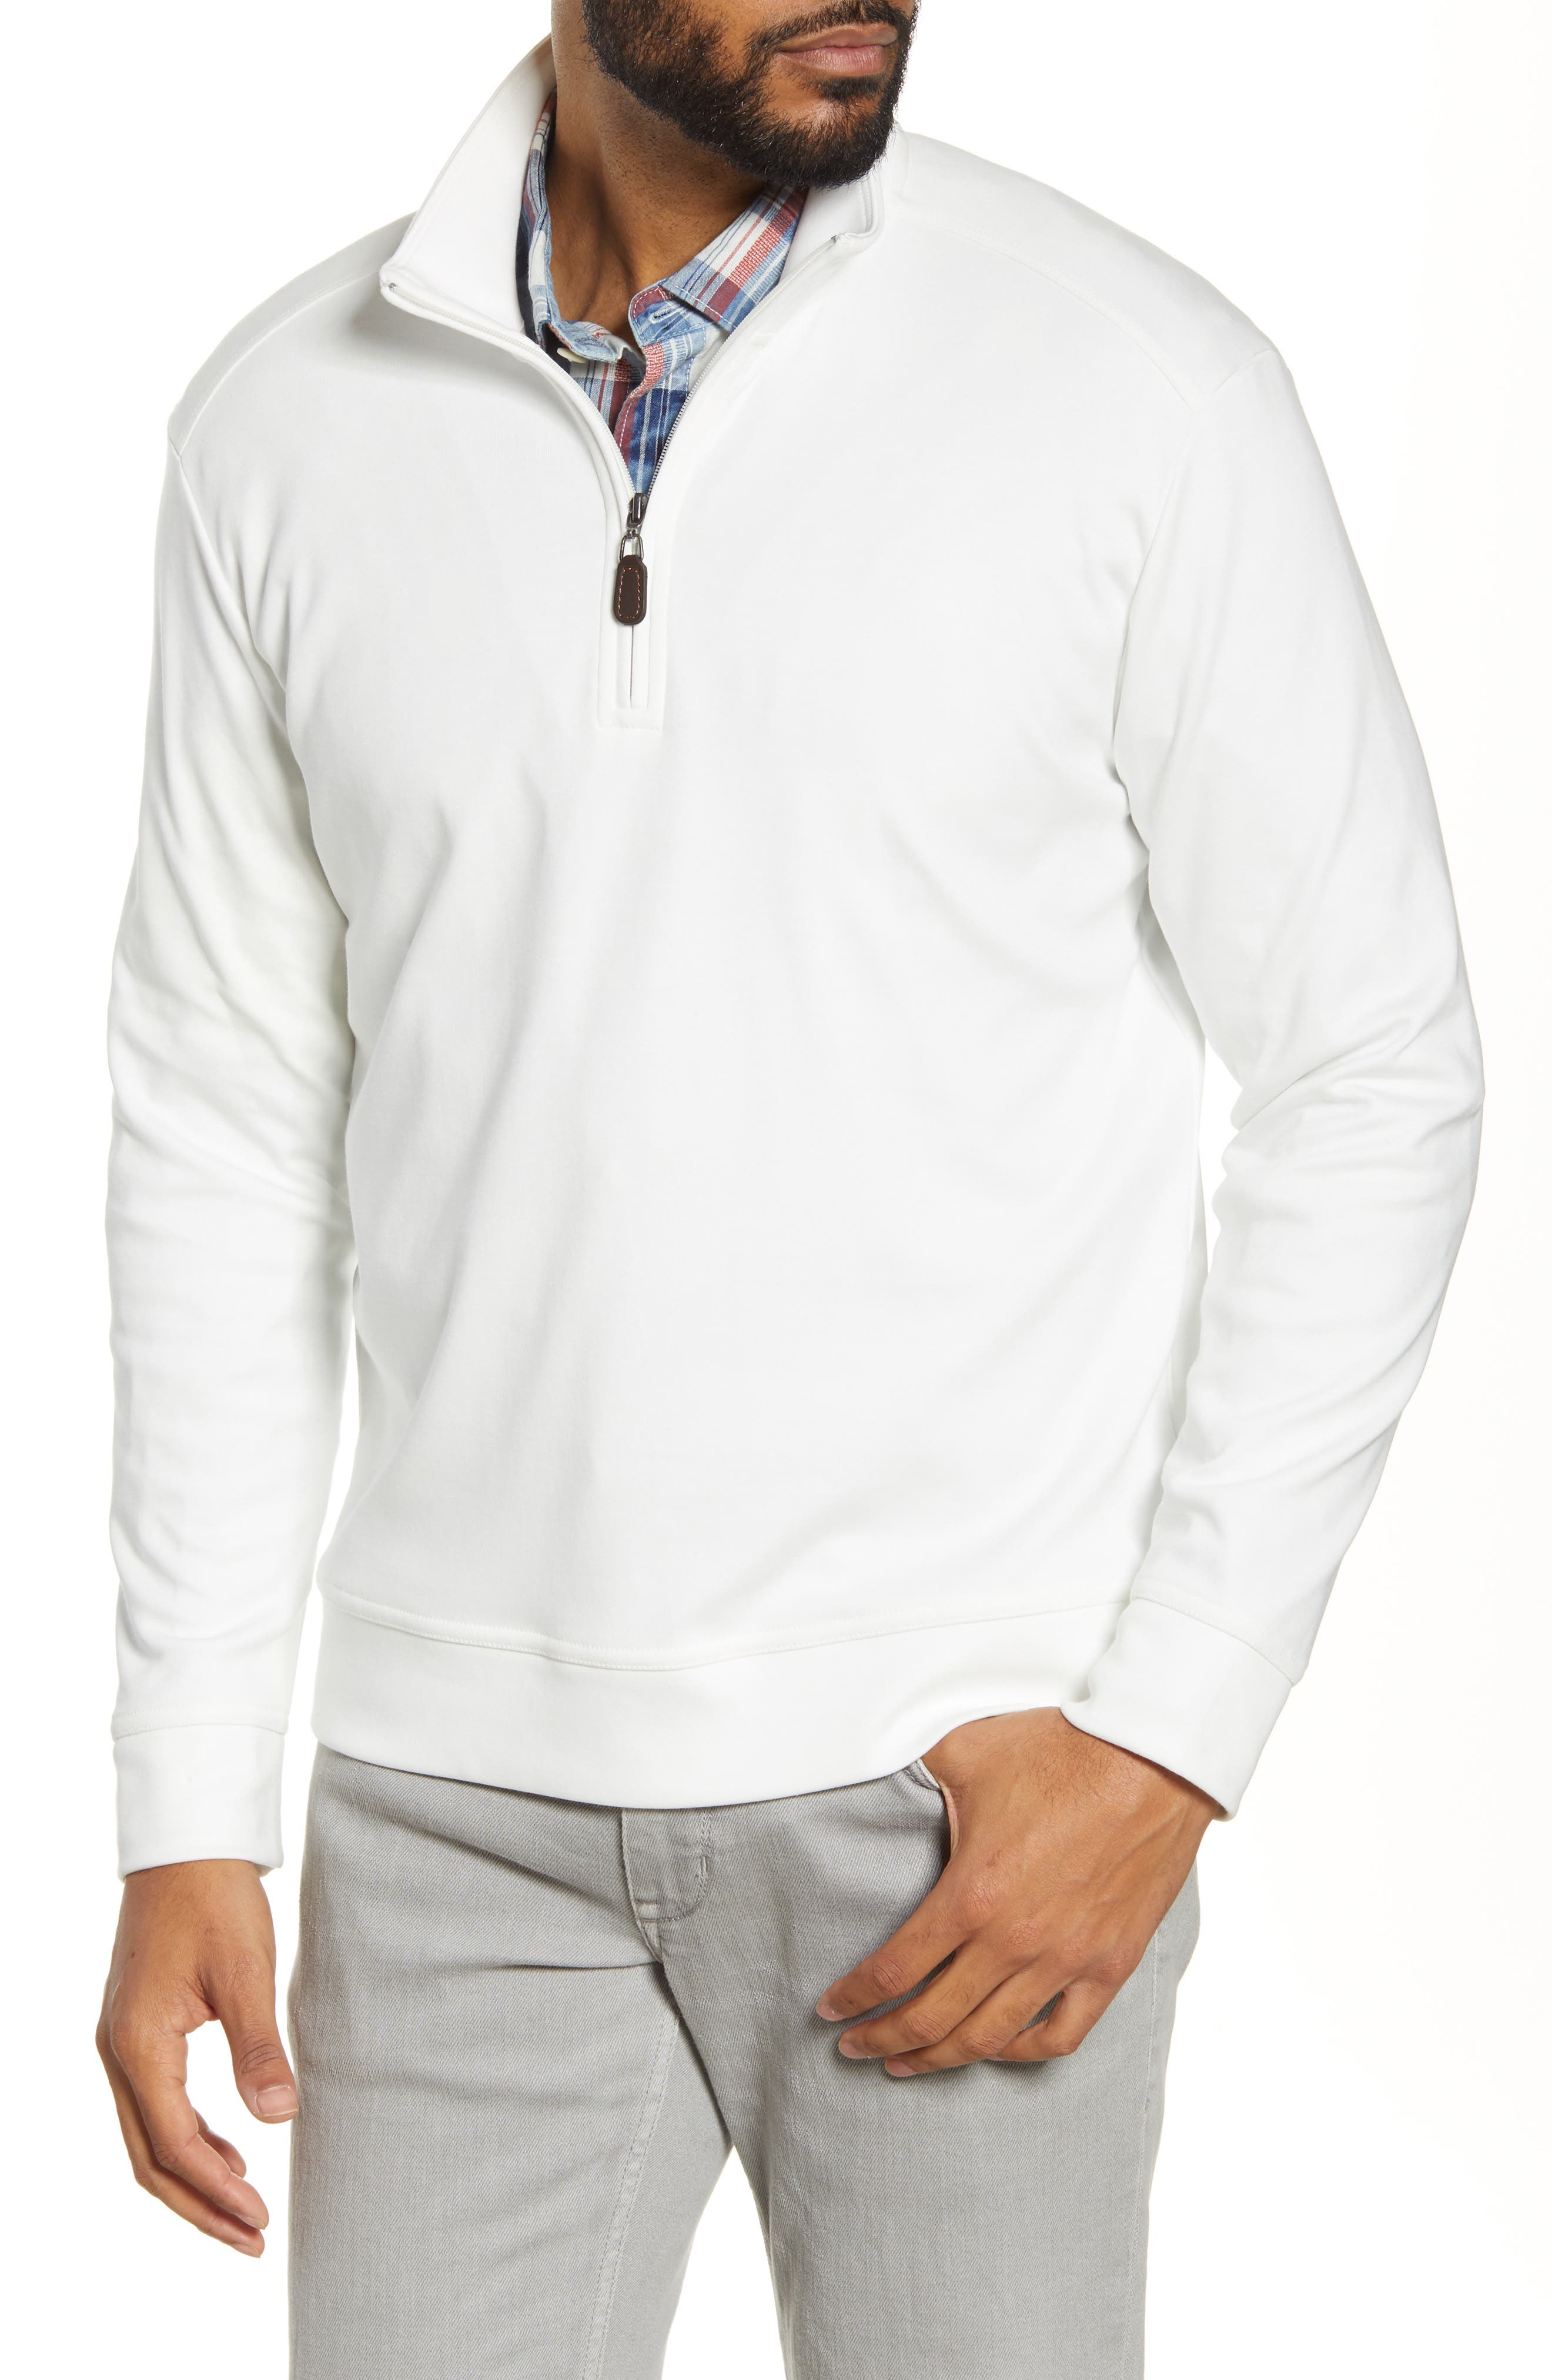 tommy bahama mens pullover